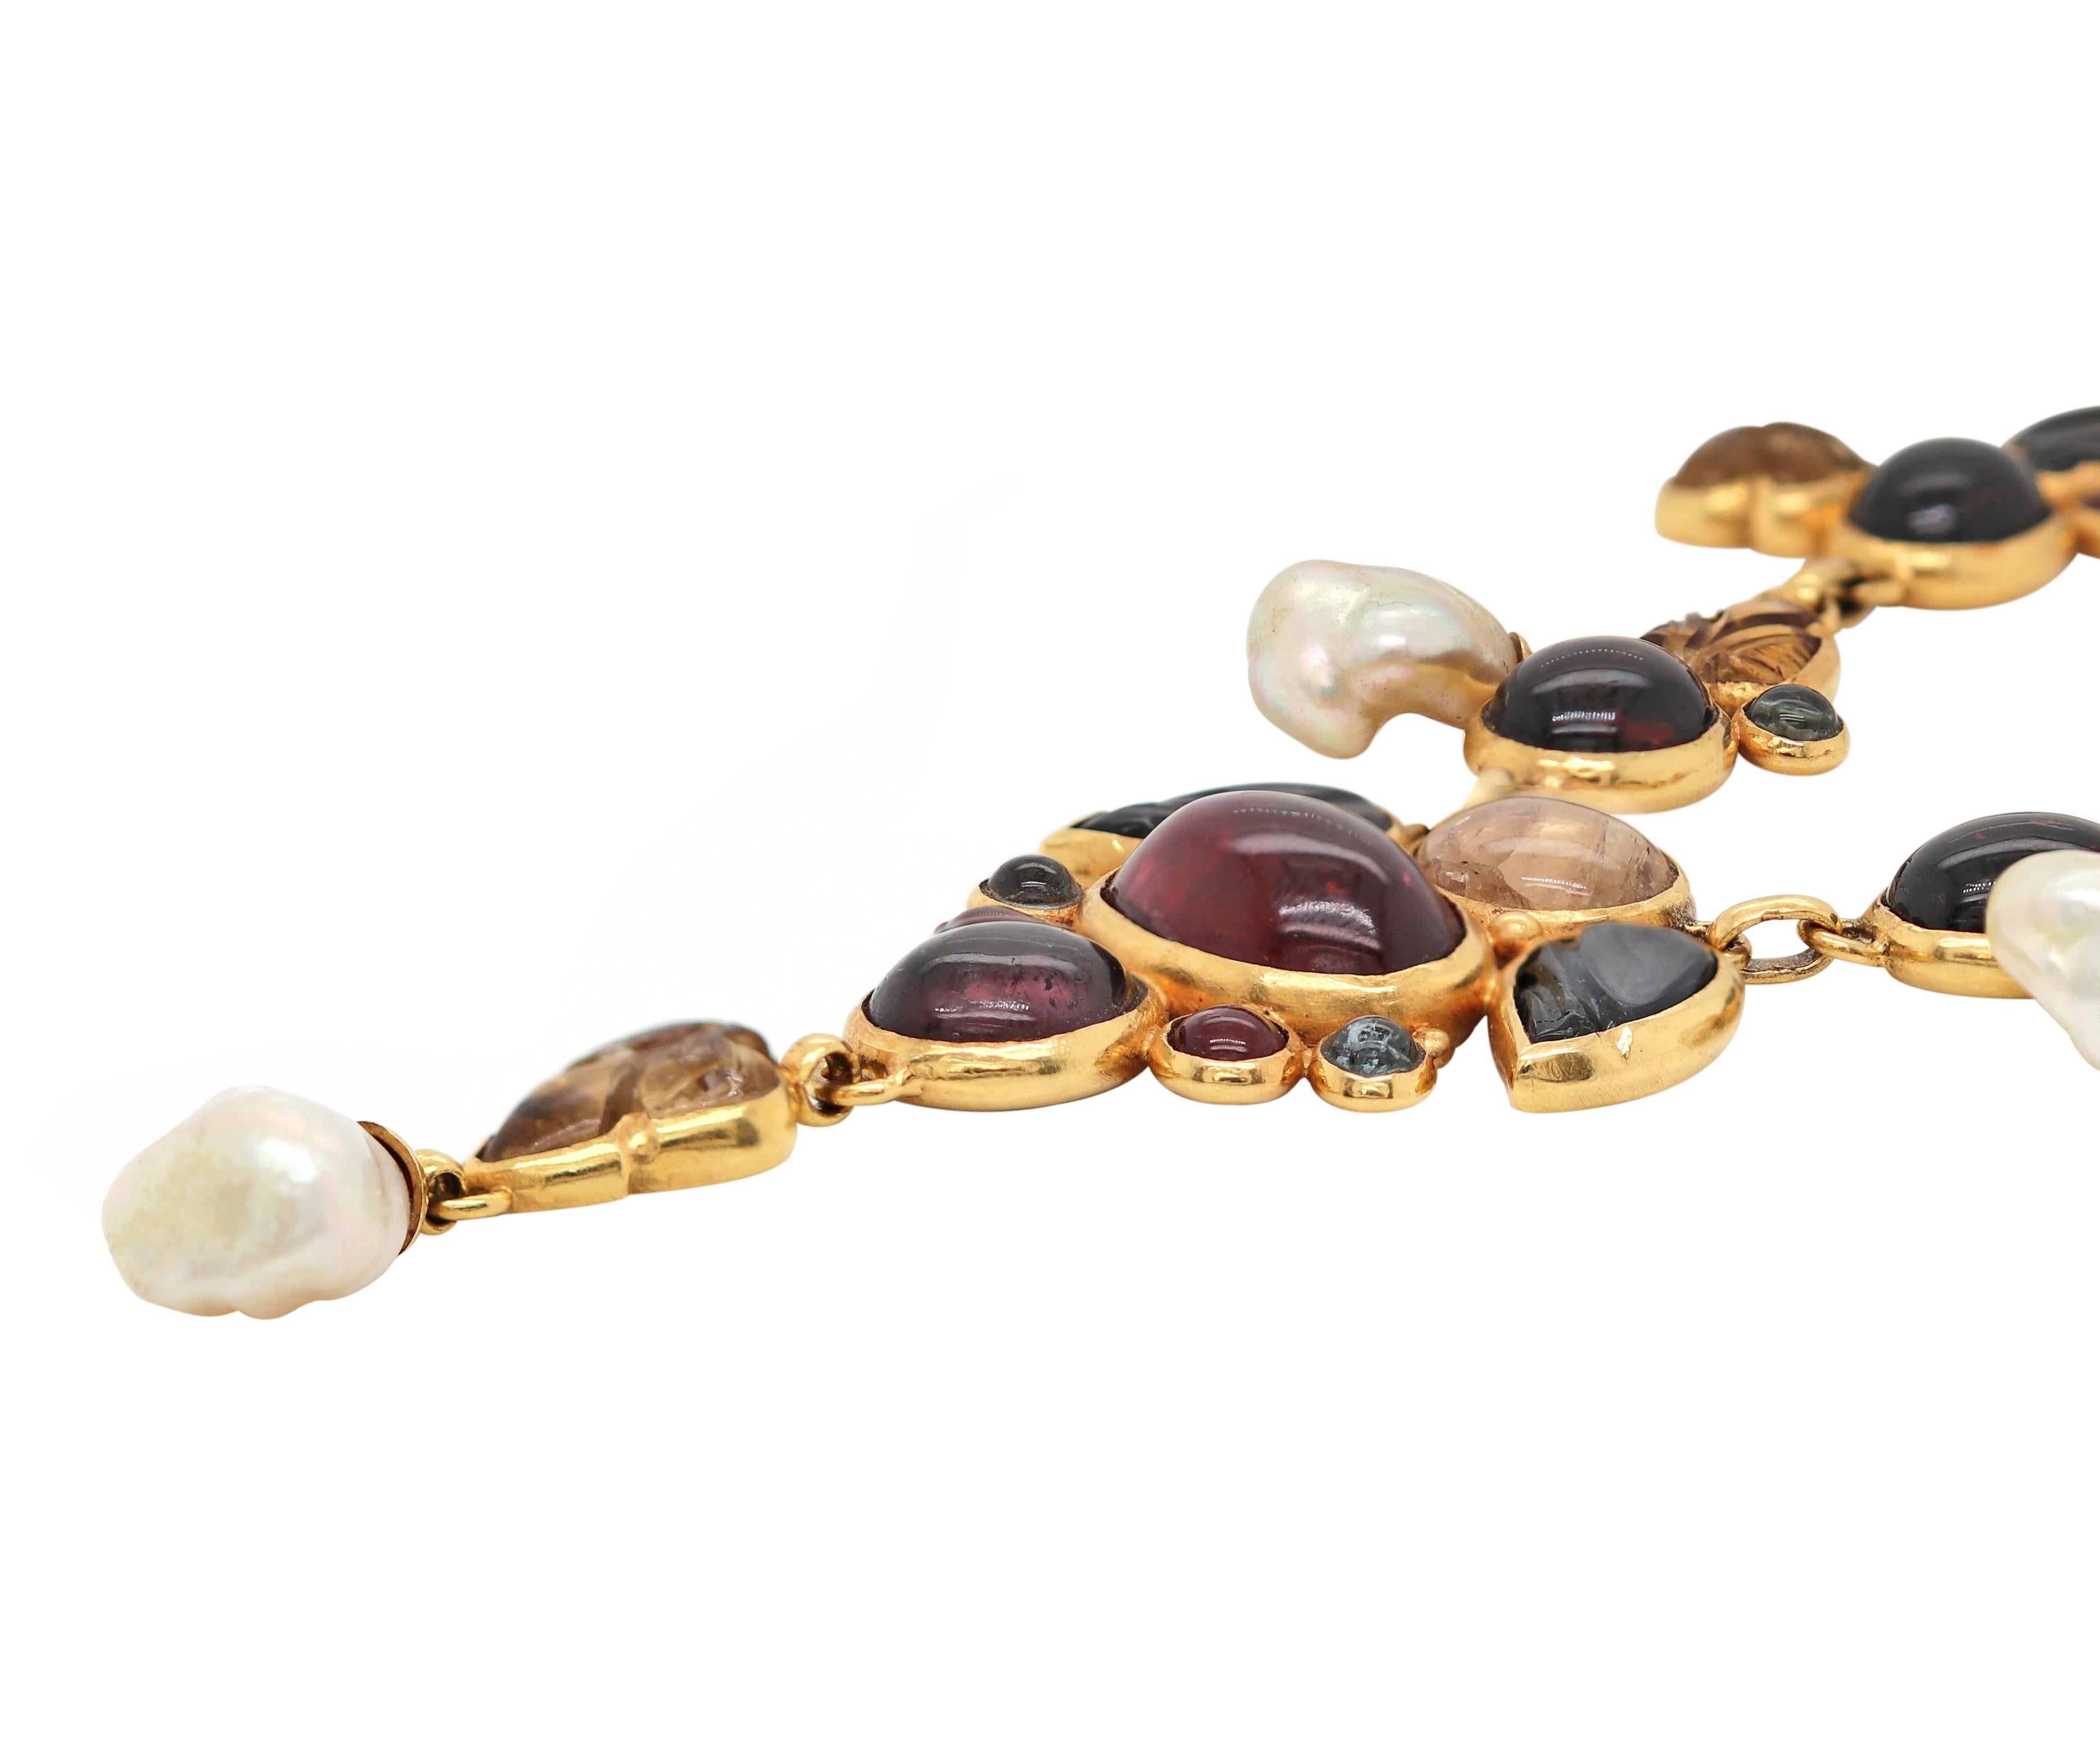 This unique necklace is beautifully set with an incredible mix of gemstones and pearls all mounted in 21 carat yellow gold, fitted with a hook and eye closure. The necklace measures 17.5 inches in length and weighs a total of 97.8gr. Made in Bali,